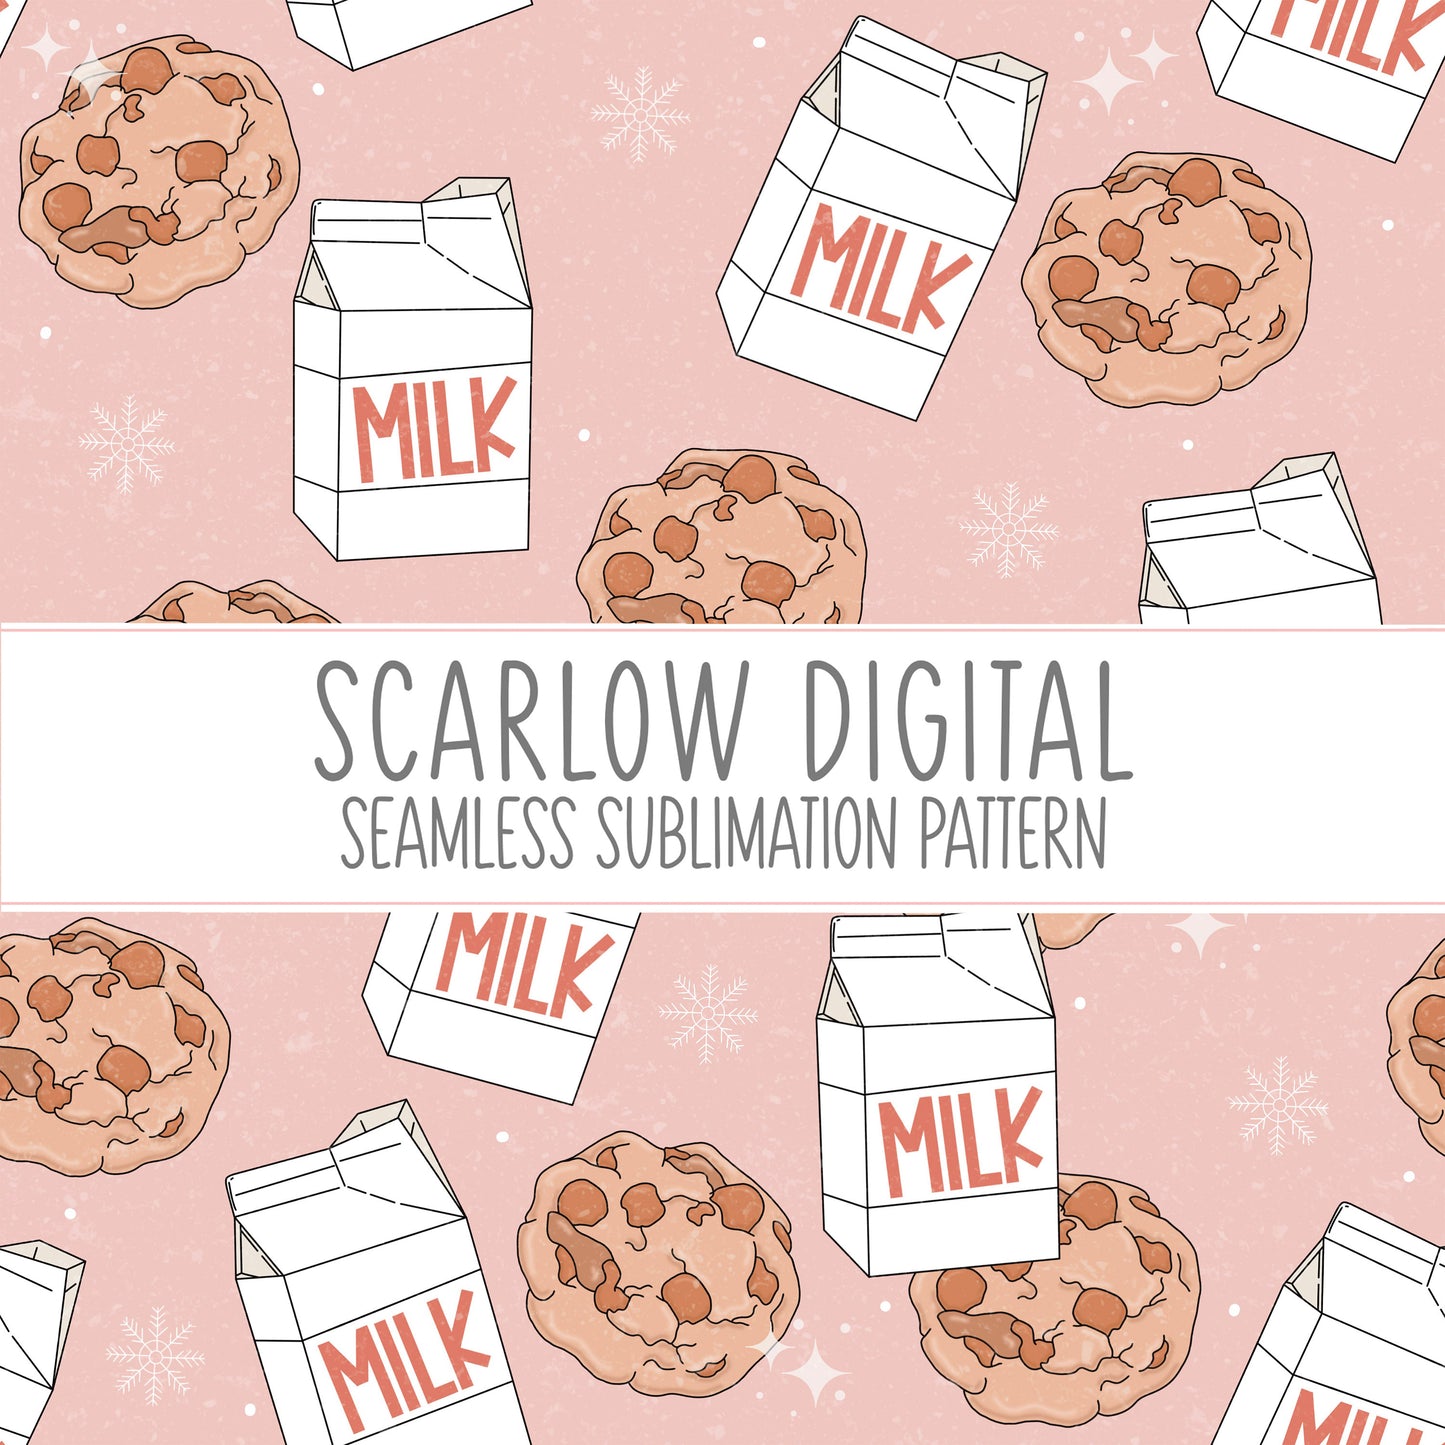 Milk and Cookies Seamless Pattern-Christmas Sublimation Digital Design Download-Santa claus seamless pattern, winter sublimation designs